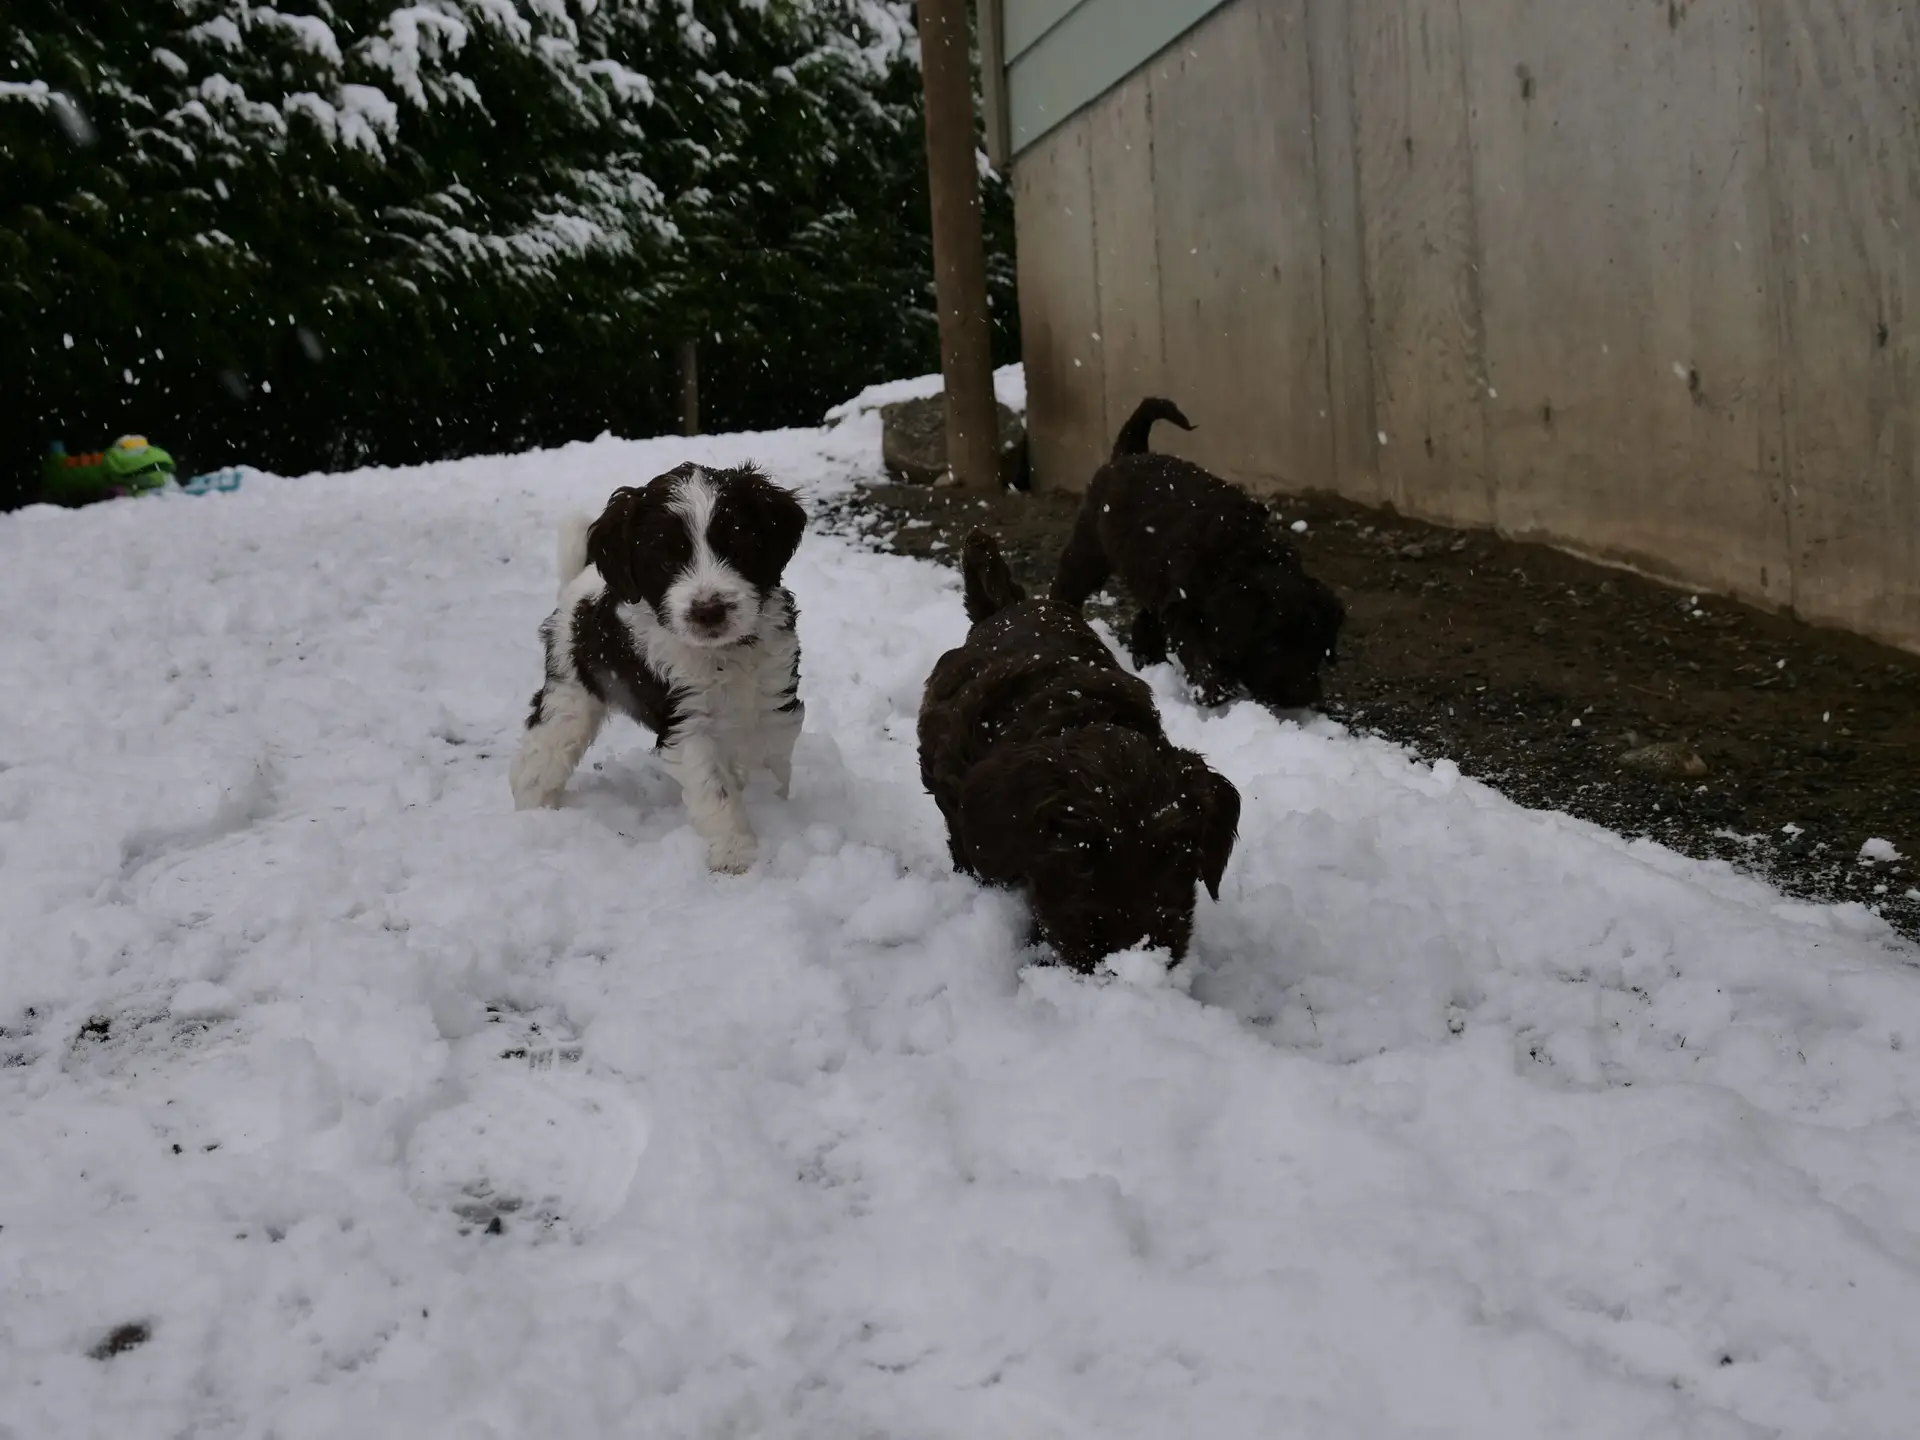 Three 5-week old labradoodle puppies exploring fresh snow fall. In the background is a line of trees, and a wooden building. Closest to the building is a dark chocolate puppy sniffing the ground. Closer to the camera is another dark chocolate puppy also sniffing the ground. Just beside that one is a black and white puppy who is looking towards the camera.